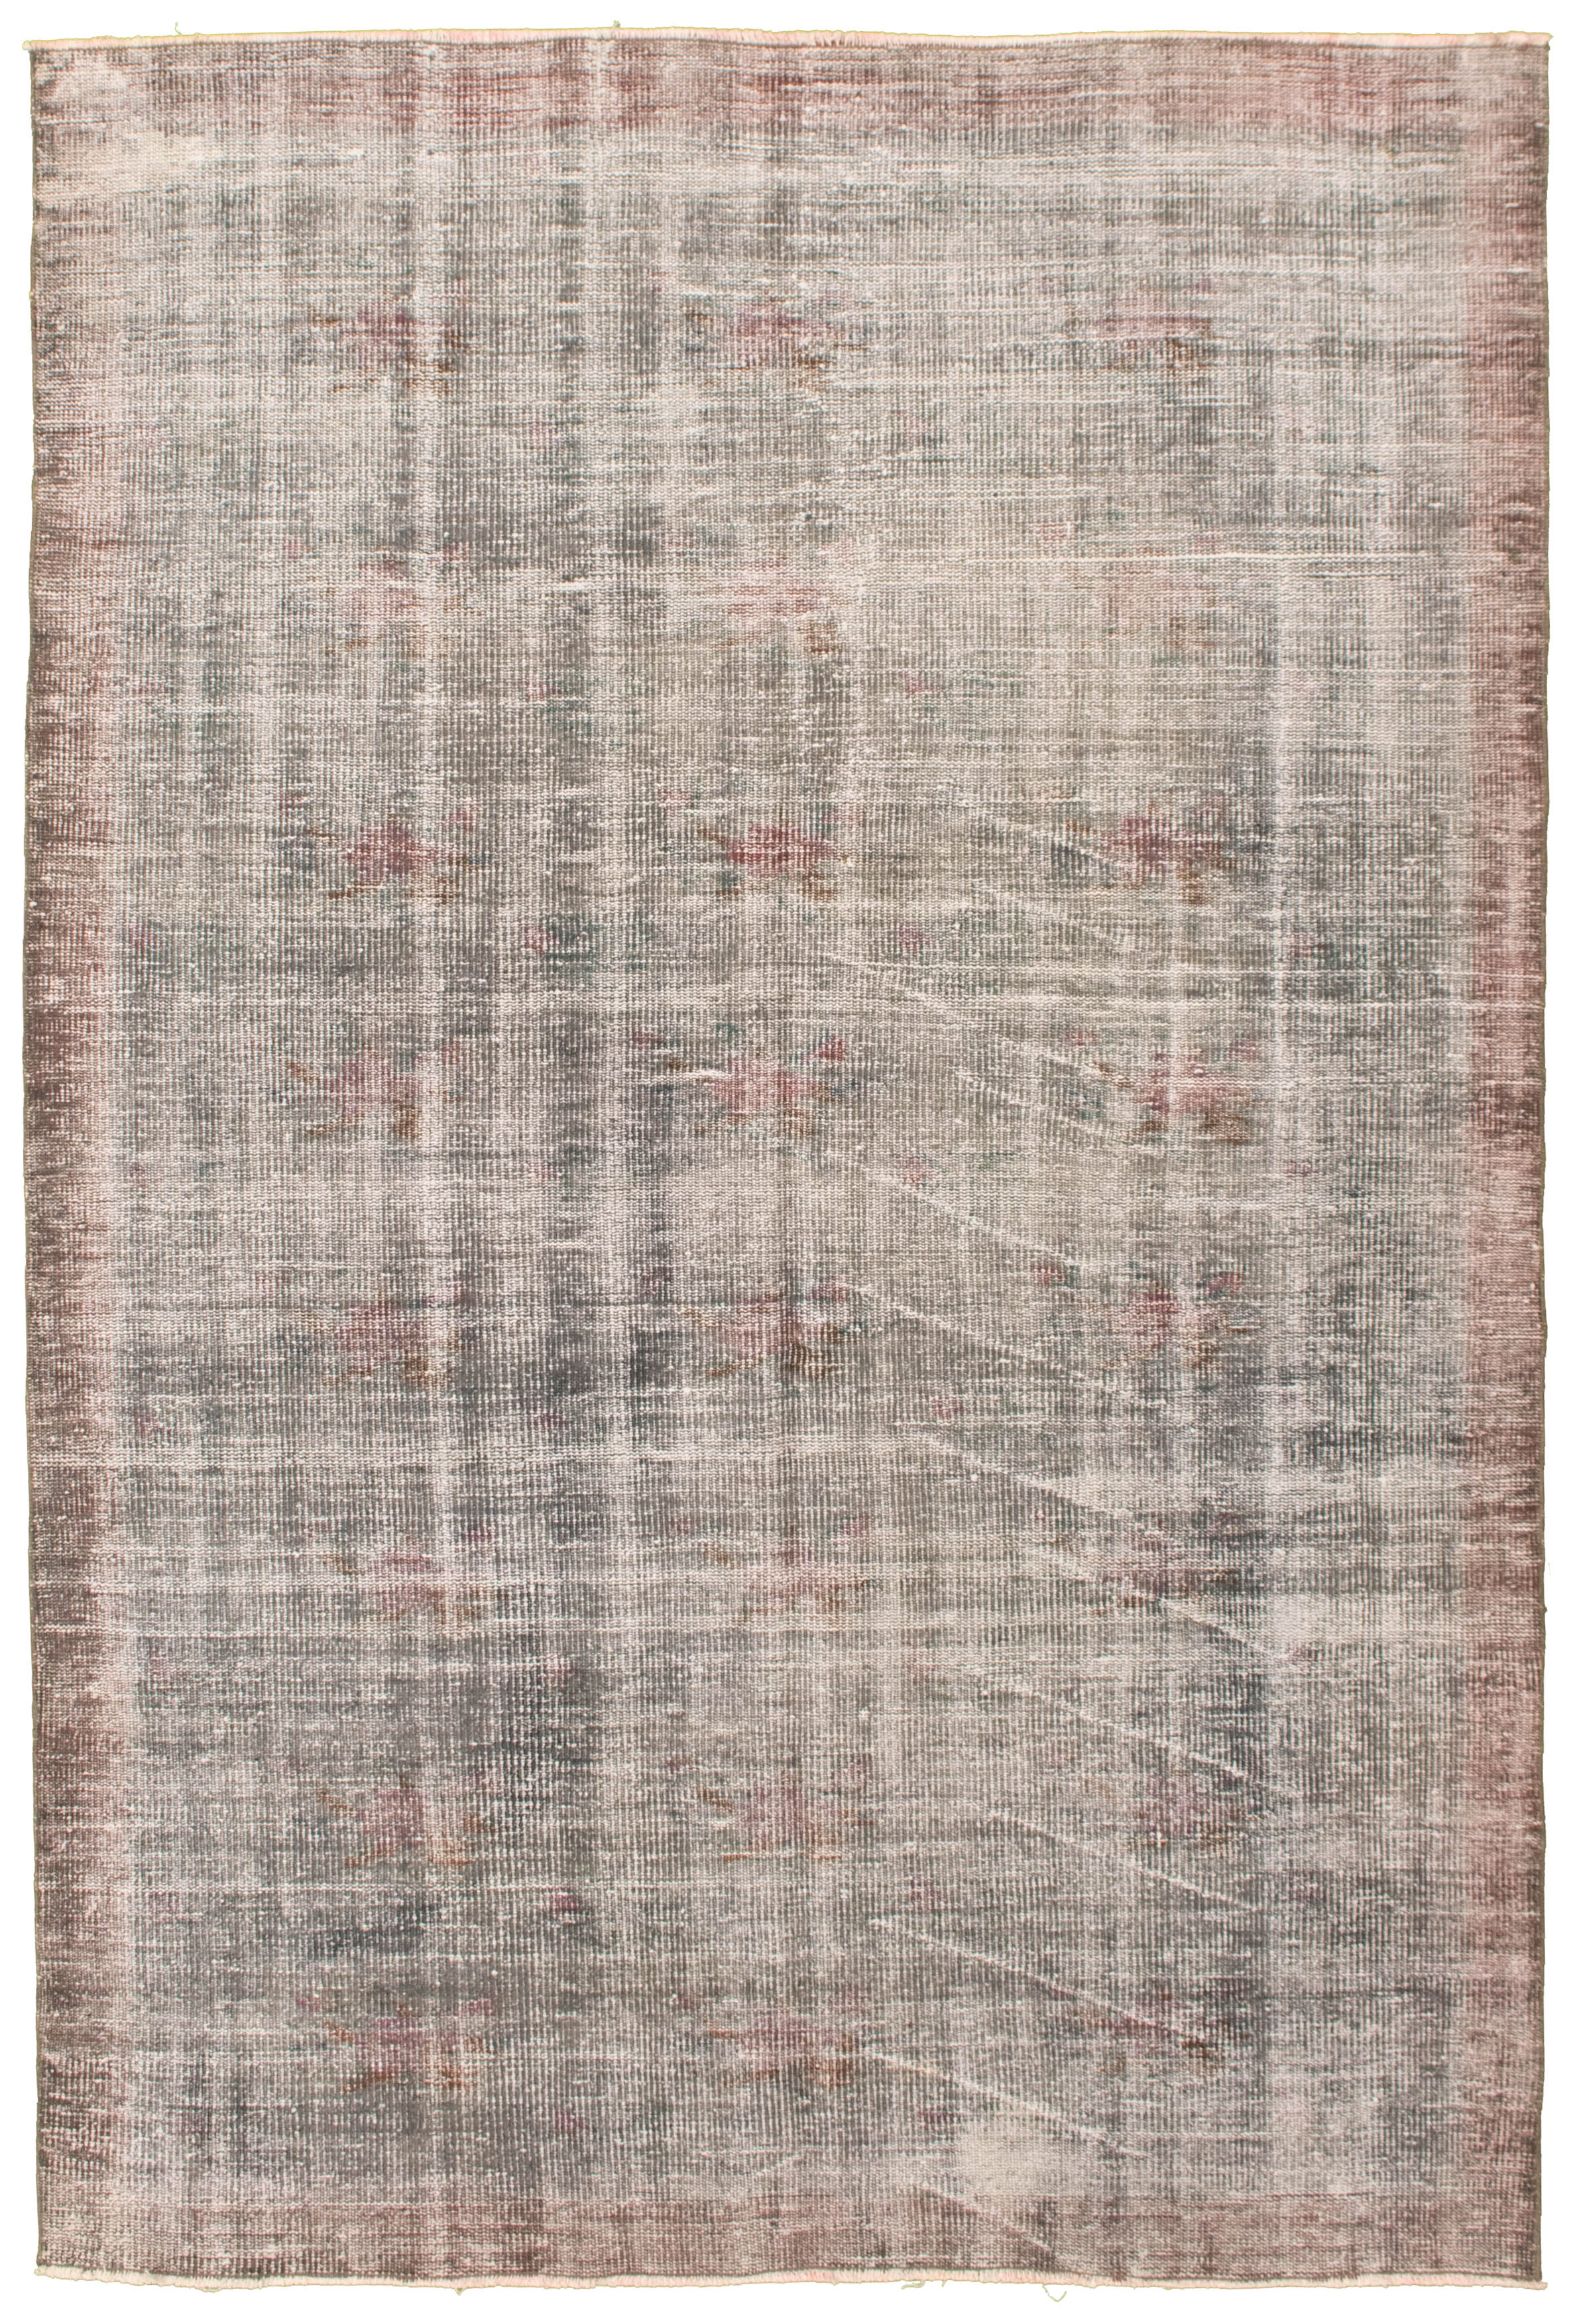 Hand-knotted Color Transition Teal Wool Rug 5'10" x 8'7" Size: 5'10" x 8'7"  